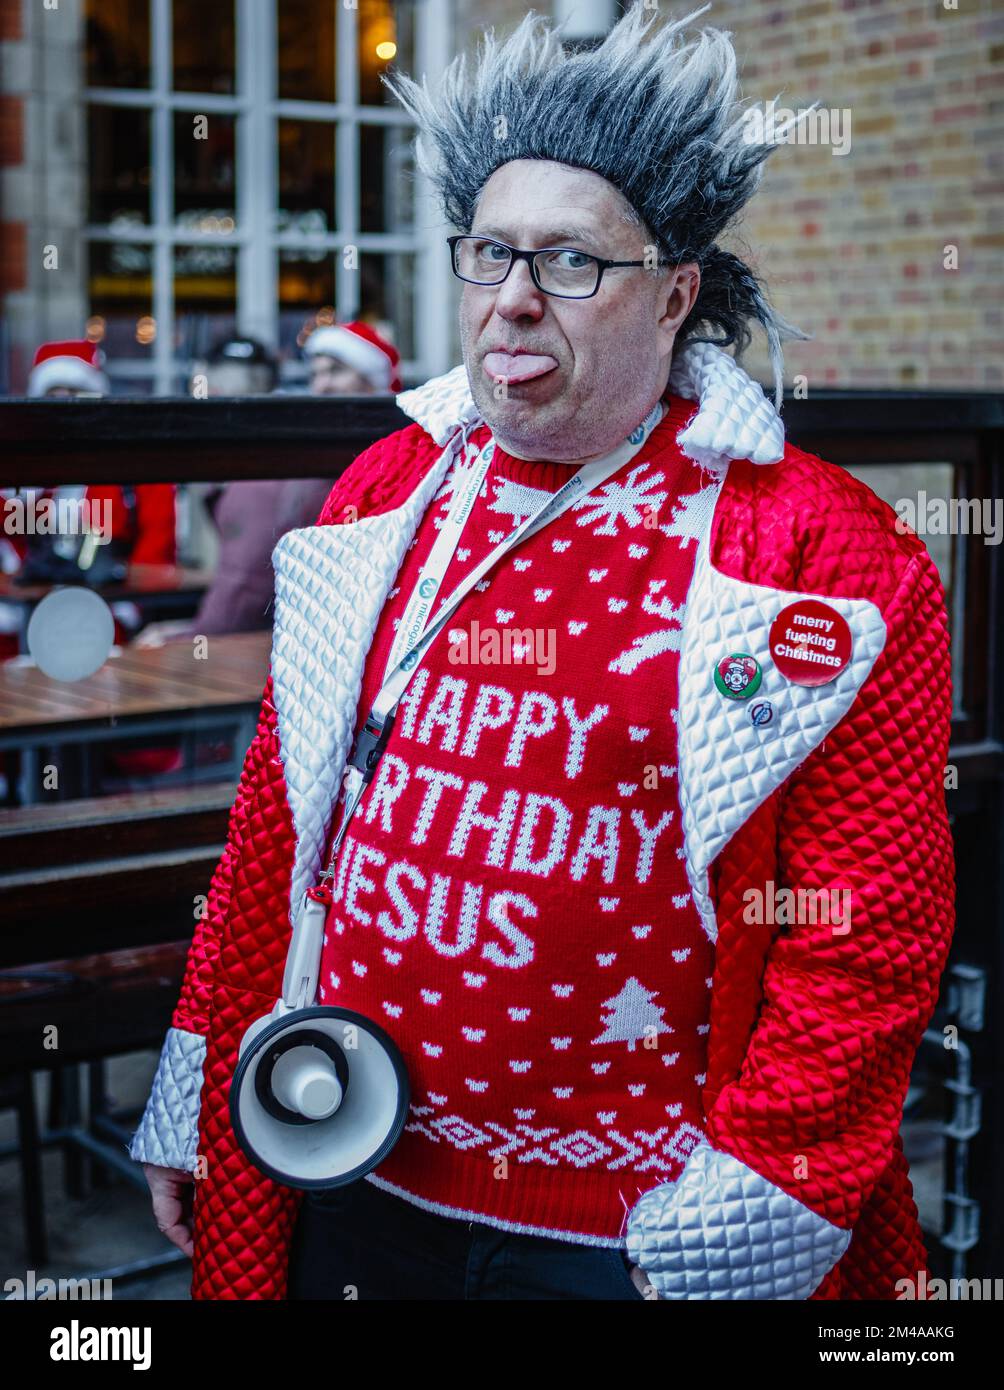 A cheeky spikey haired reveller at the annual santacon event in London. Stock Photo